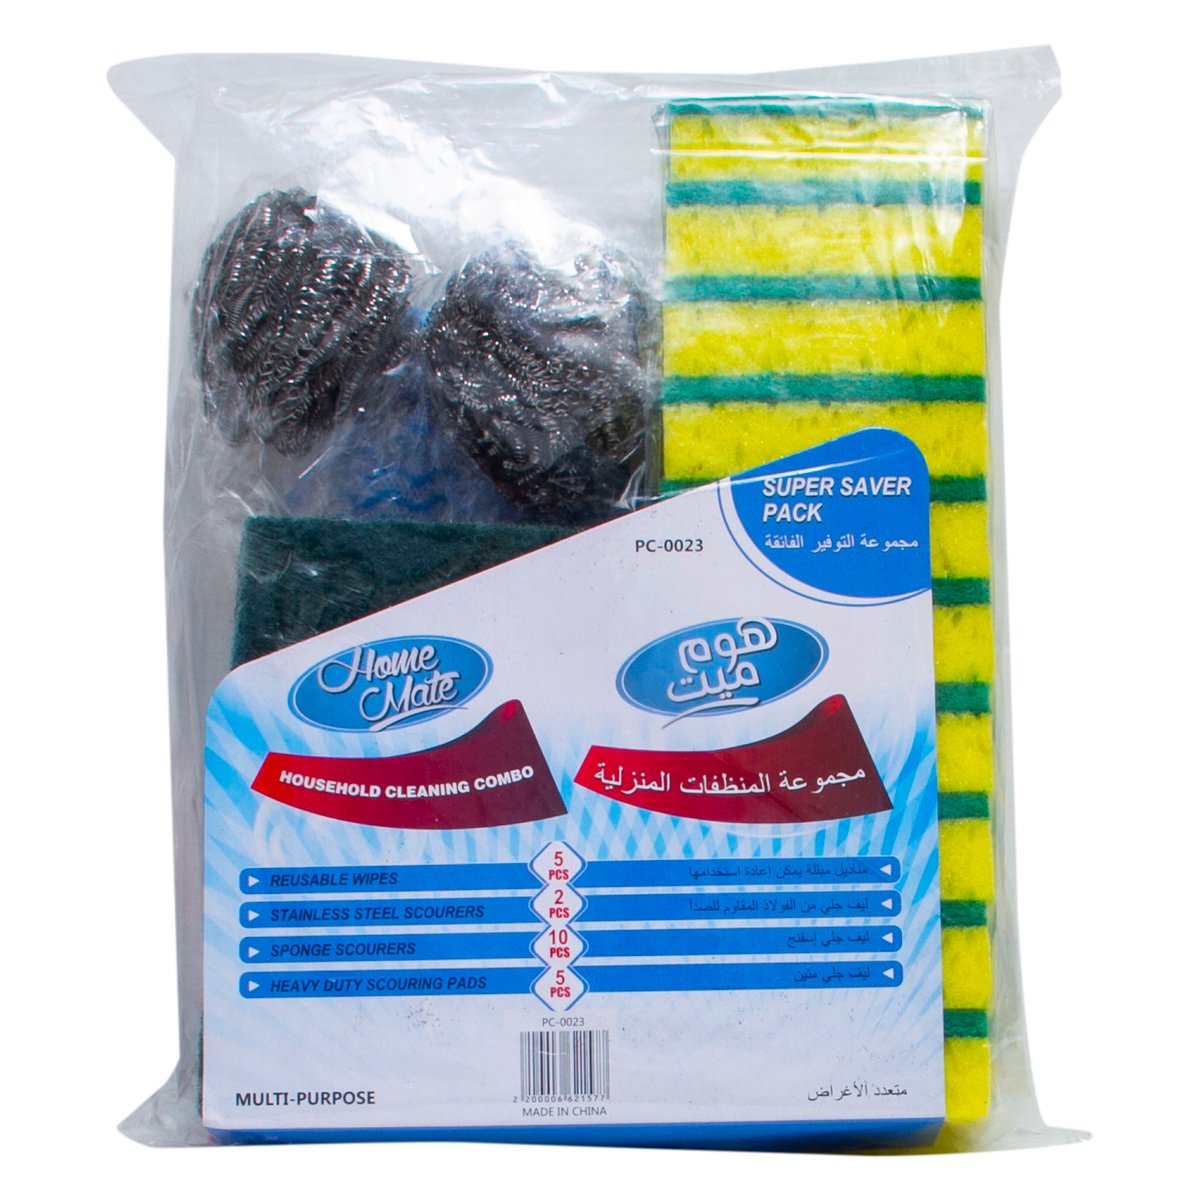 Home Mate Household Cleaning Combo 1set